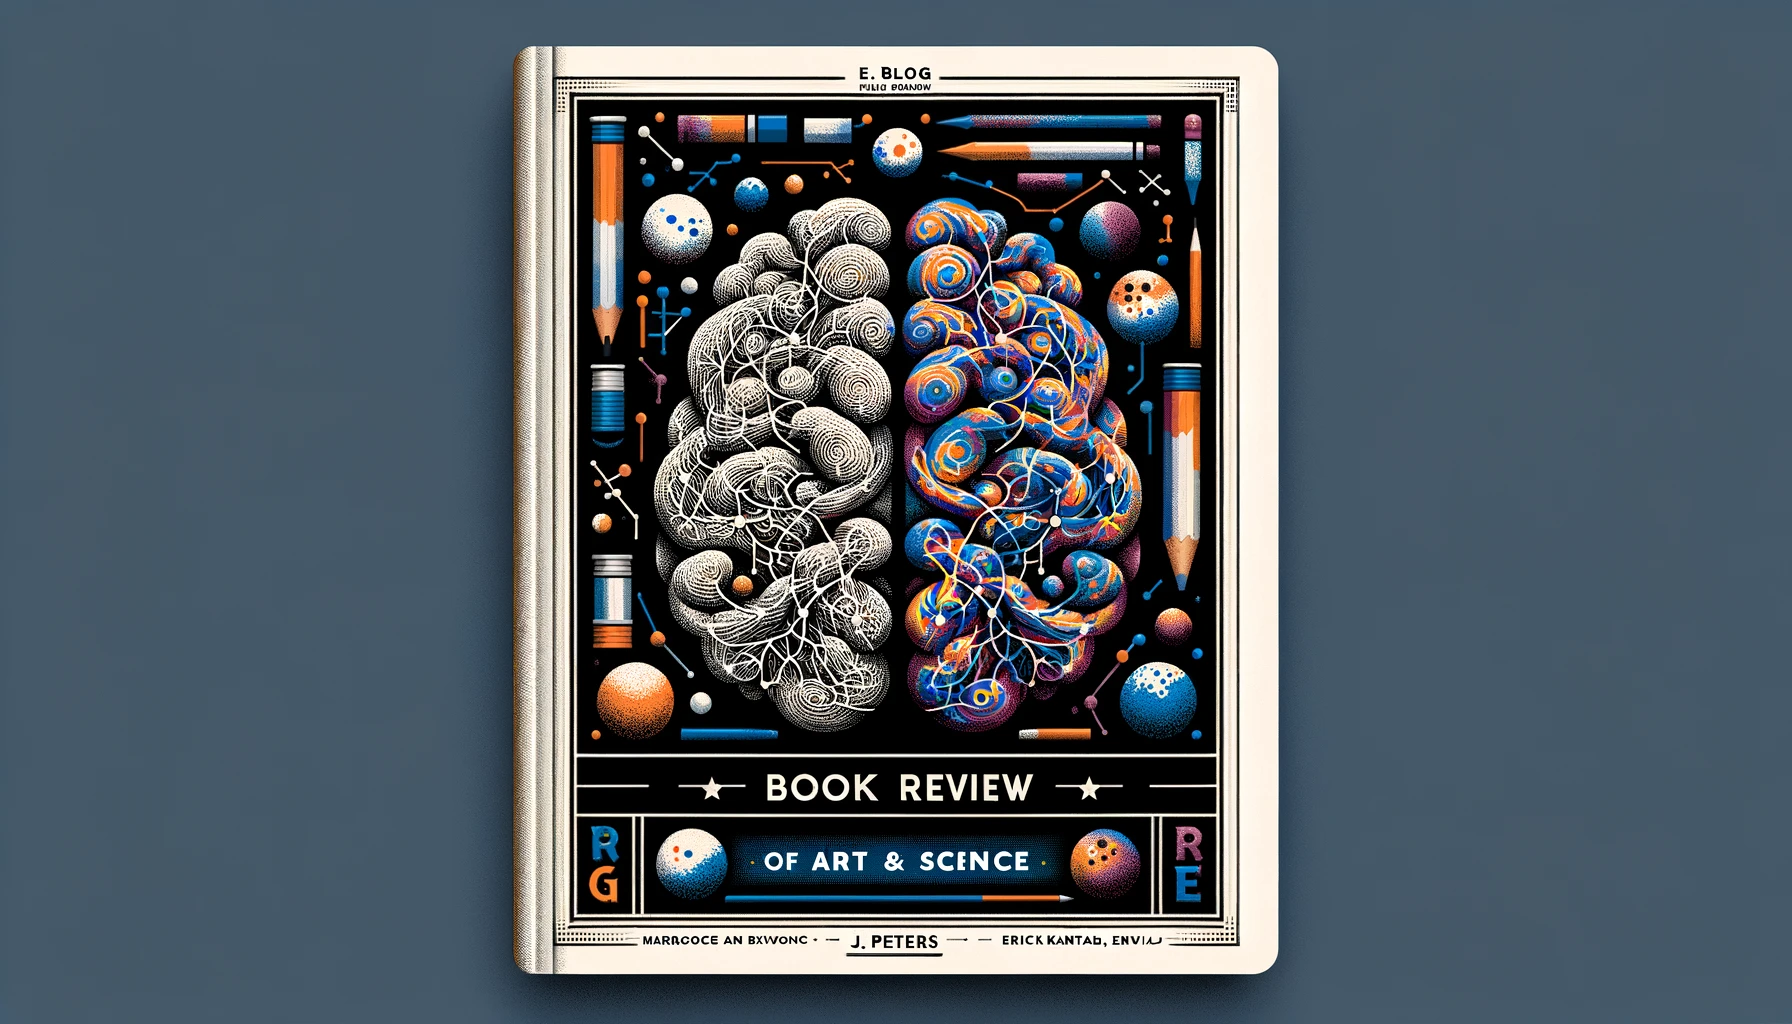 BOOK REVIEW: Essays on Art and Science